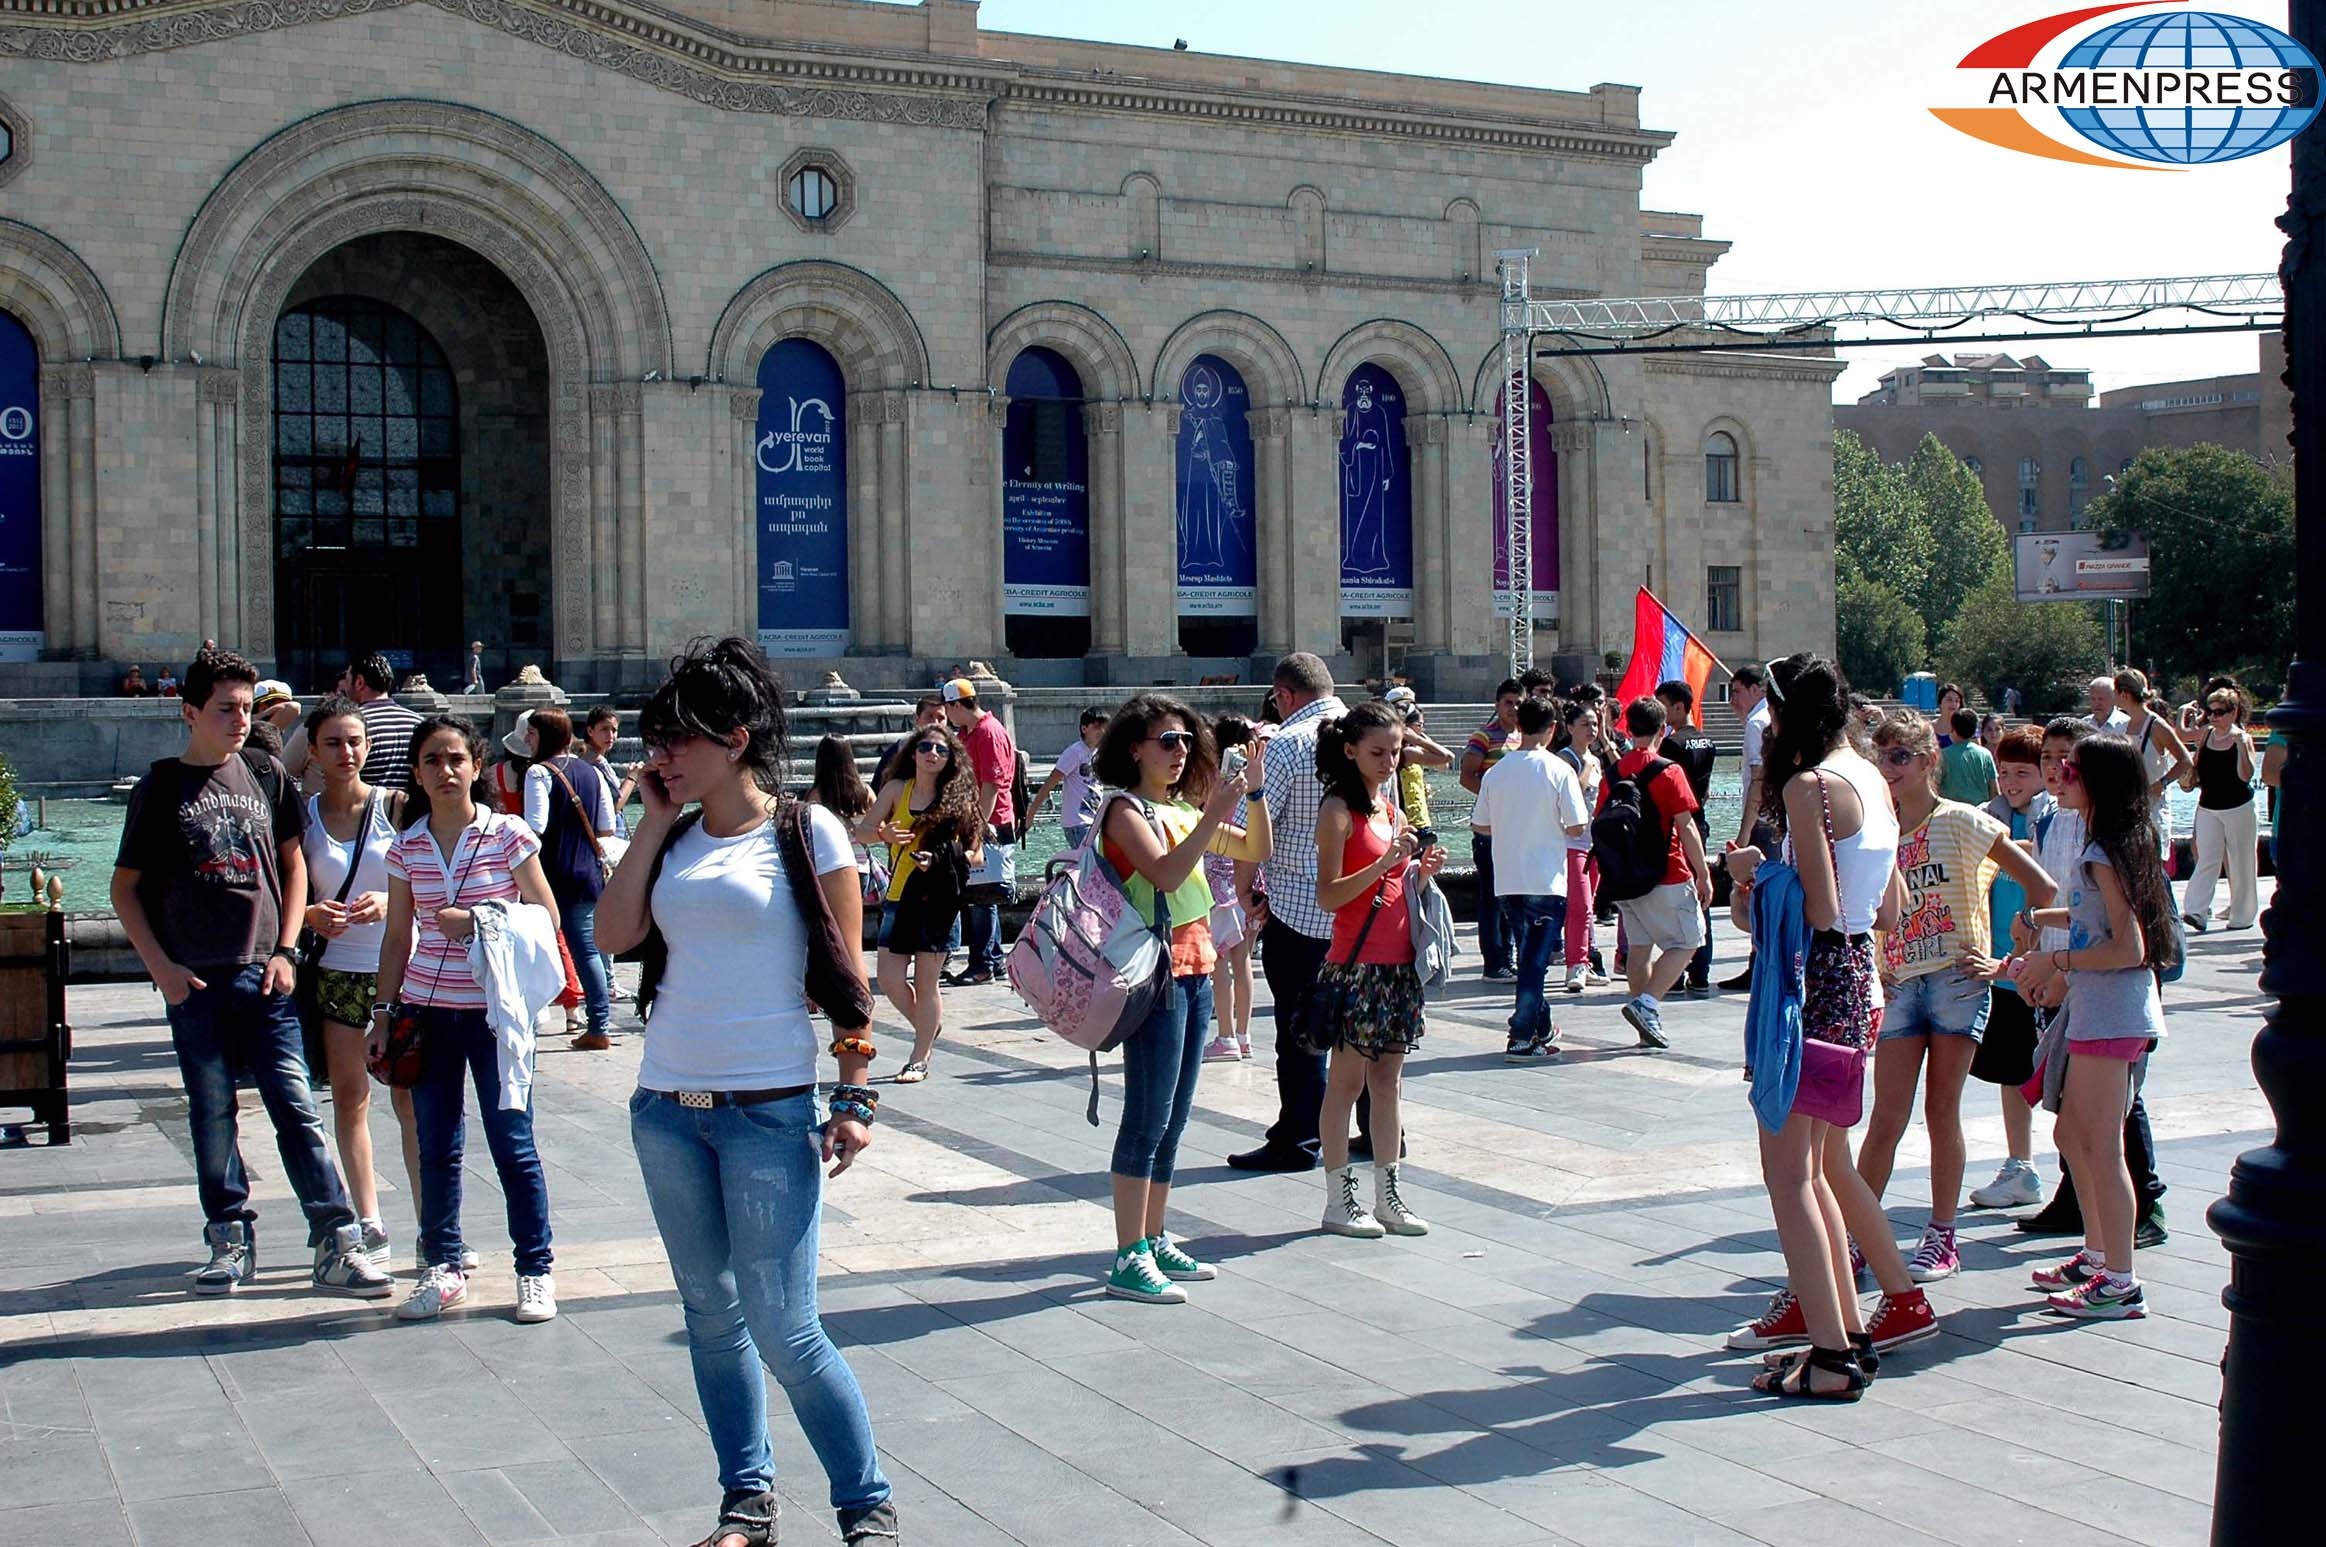 About 12 thousand Syrian-Armenians live in Armenia